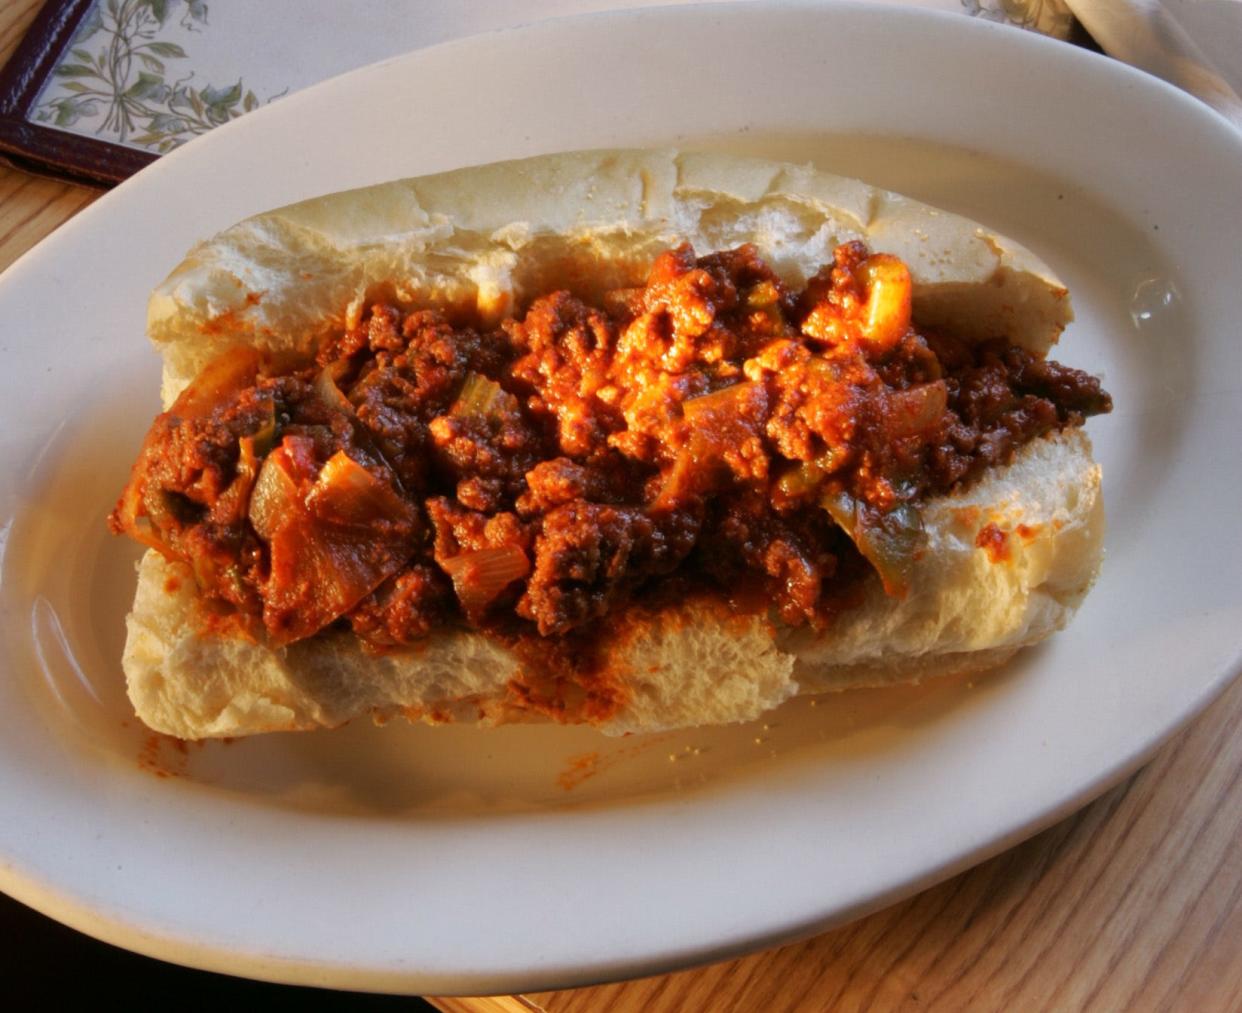 Dynamites are a local dish in Woonsocket, where they have been described as a Sloppy Joe sandwich in a torpedo roll.